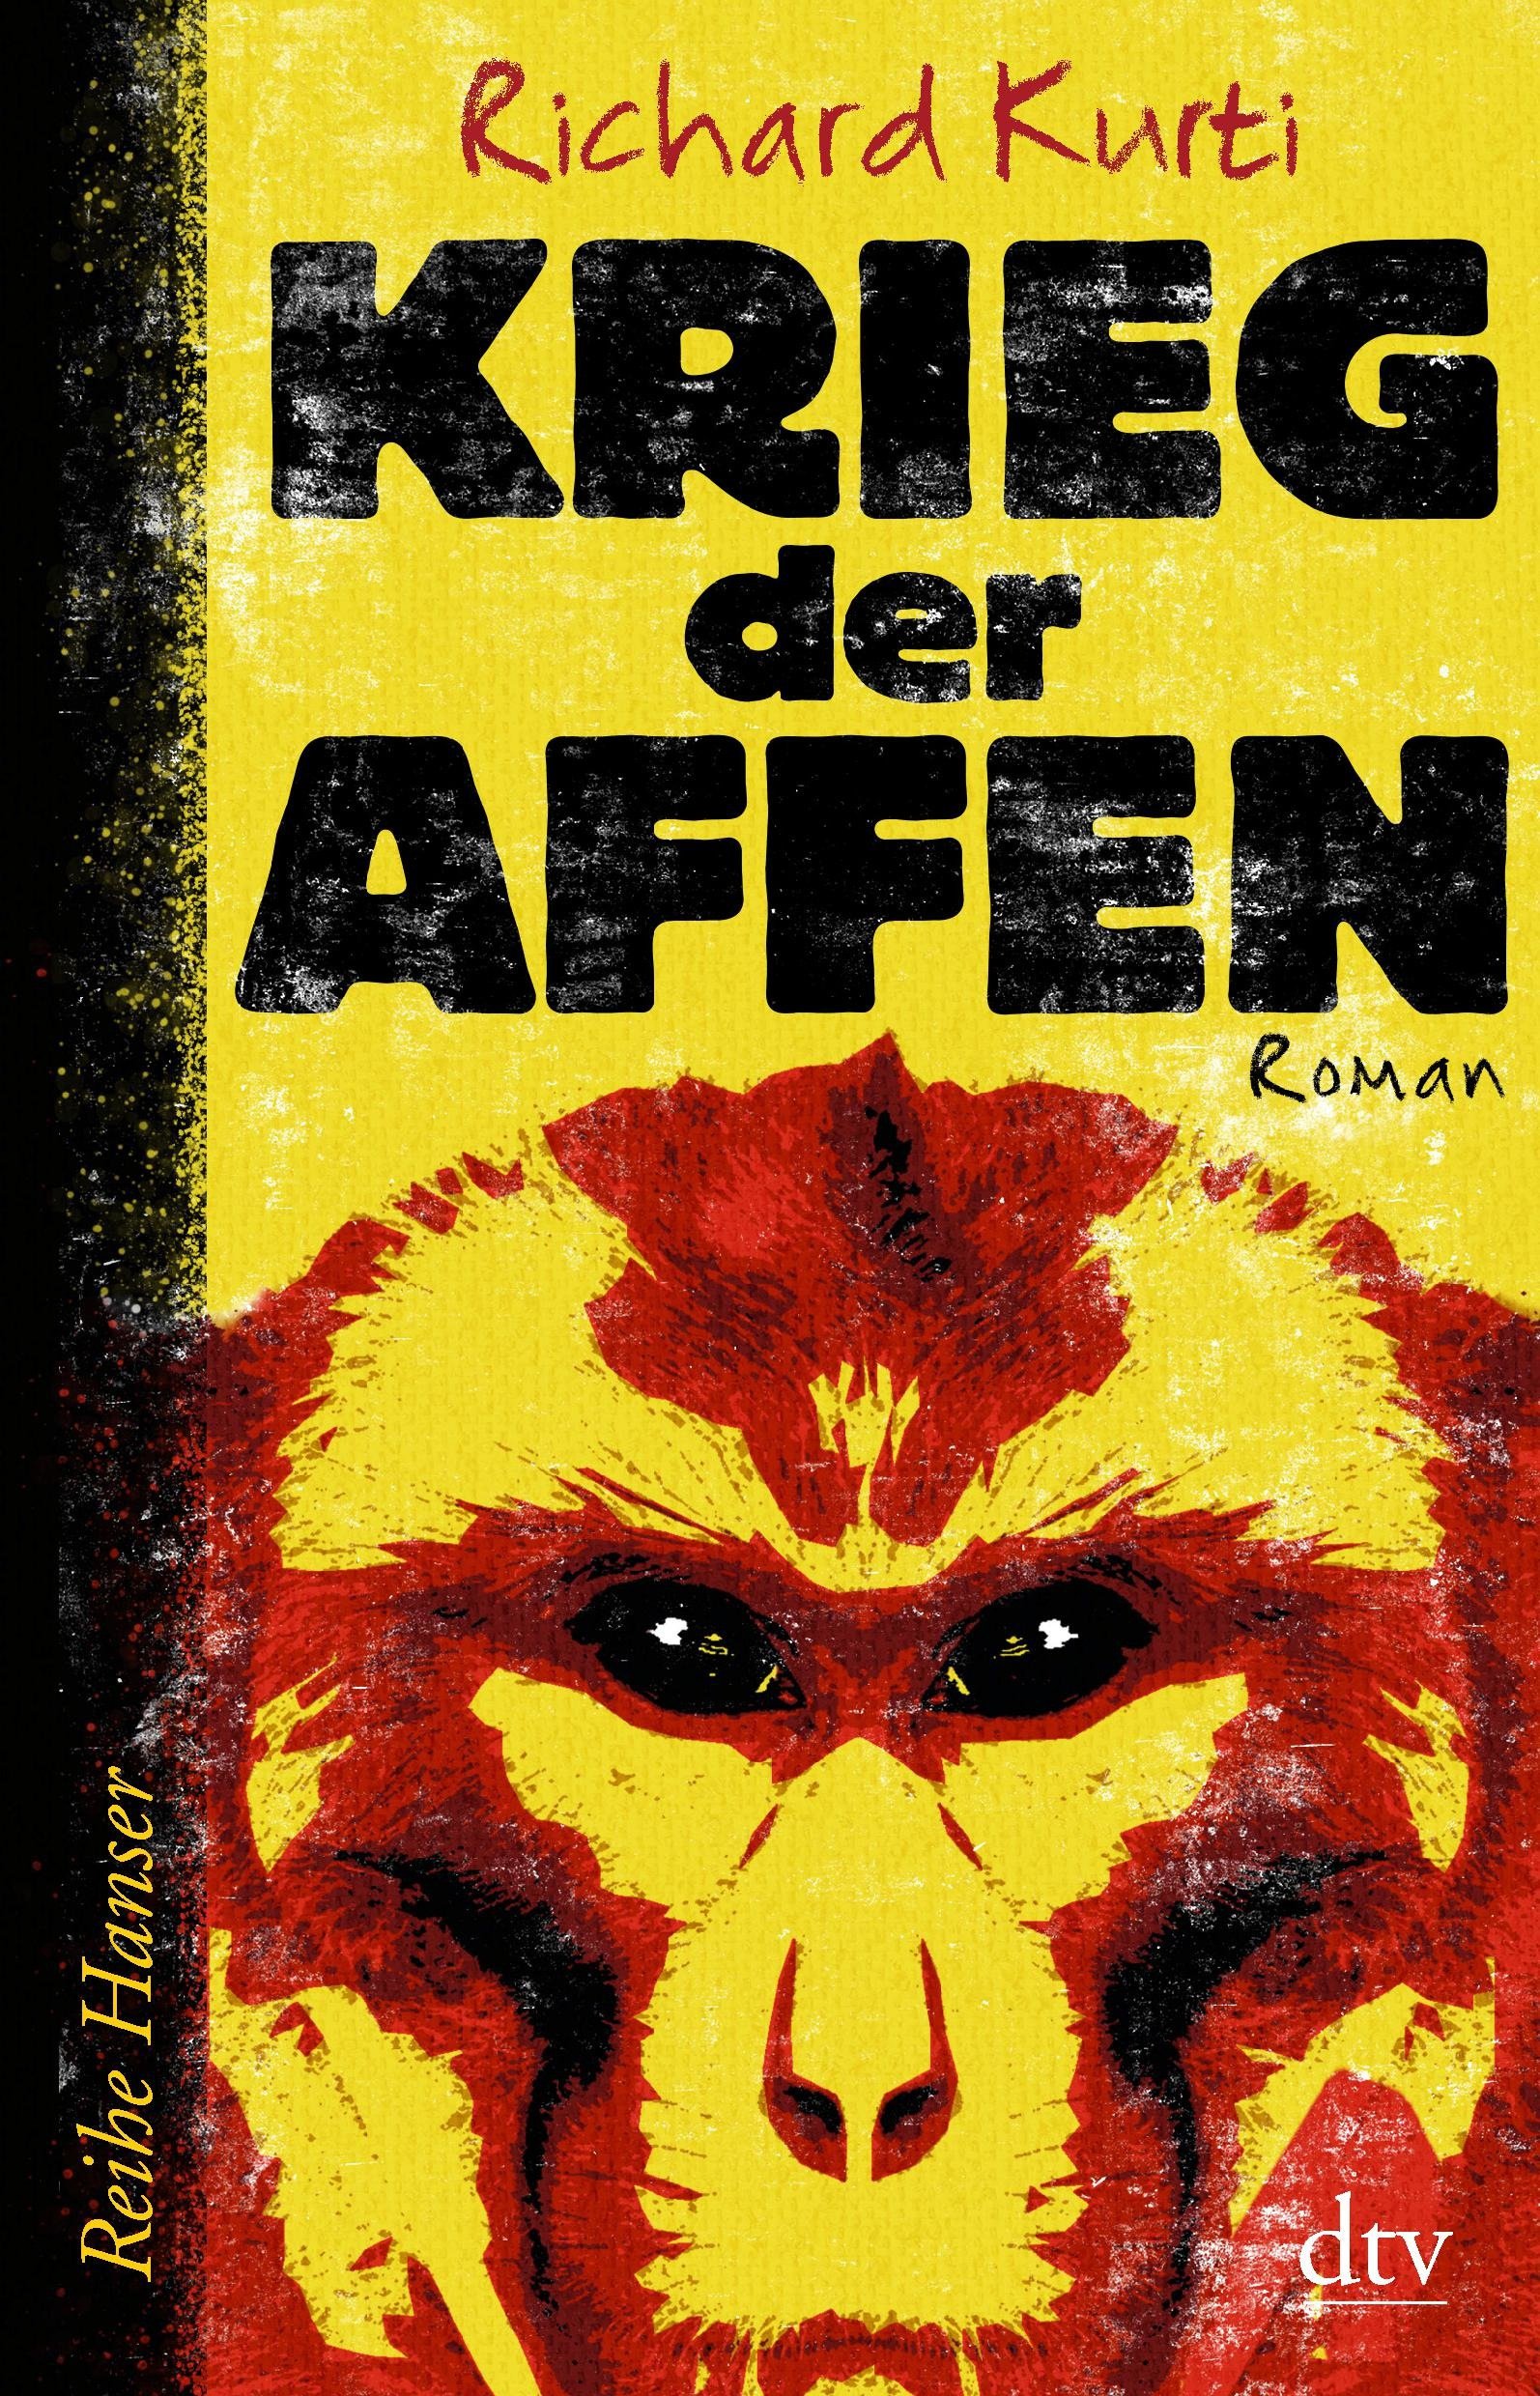 Cover for German edition.